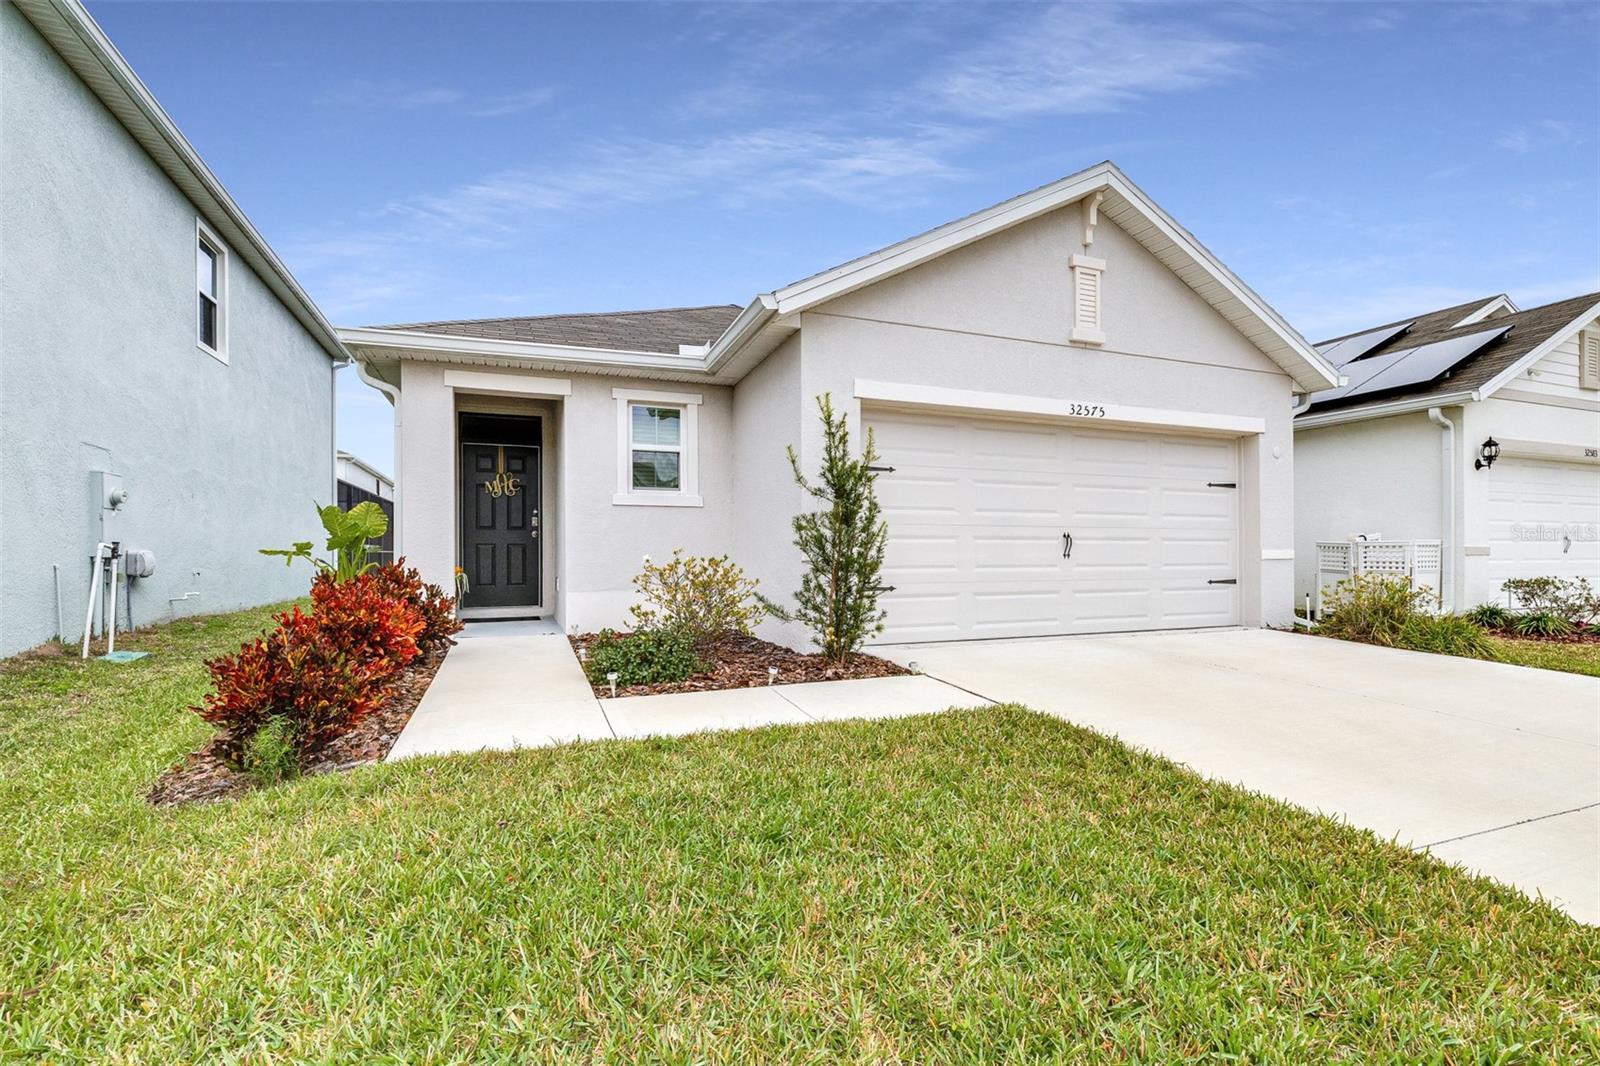 Photo one of 32575 Canyonlands Dr Wesley Chapel FL 33543 | MLS T3500038